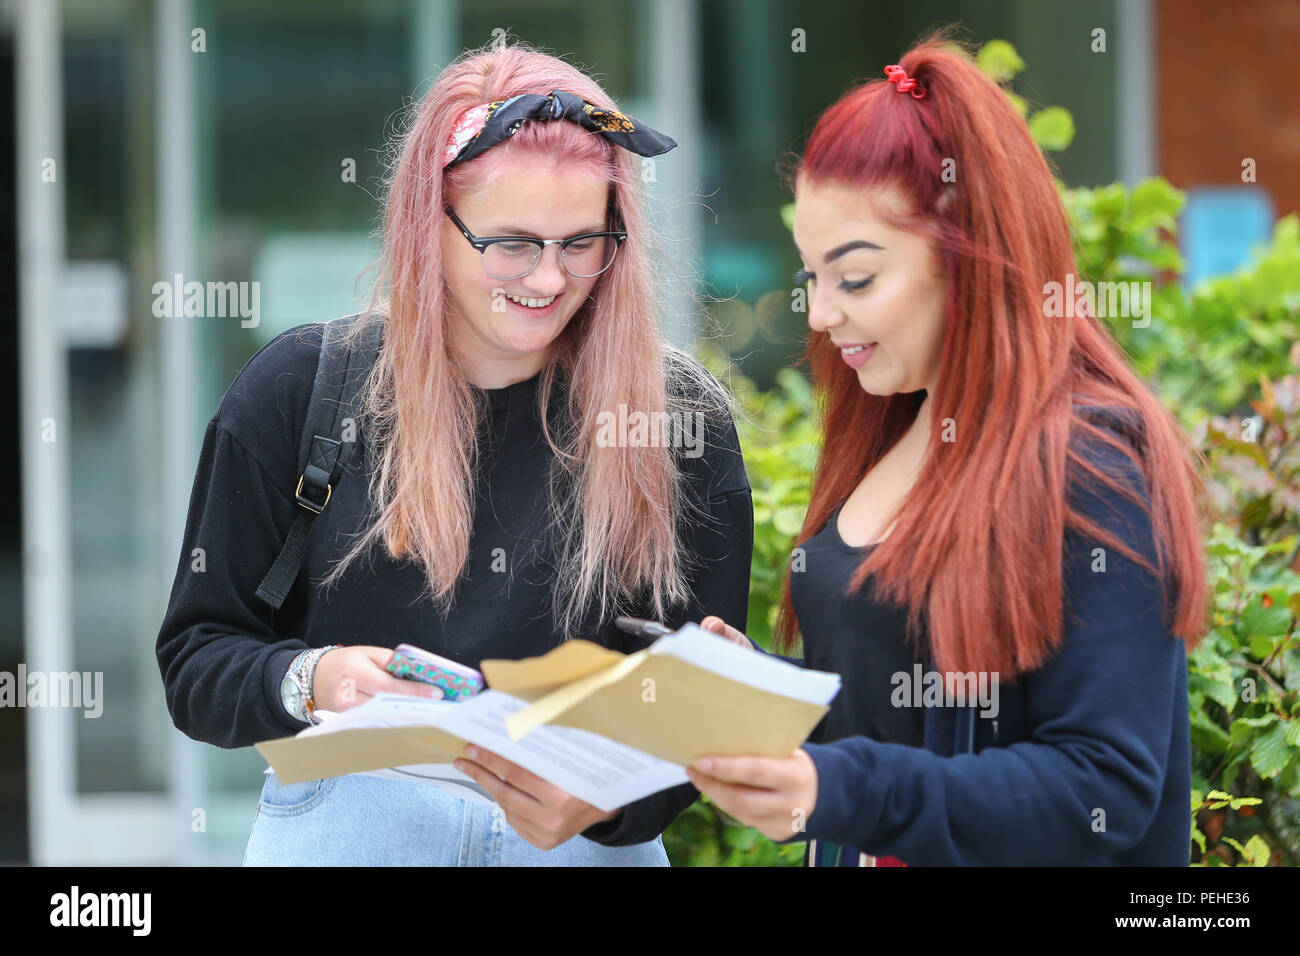 Bromsgrove, Worcestershire, UK. 16th August, 2018. Sixth form students receive their results at North Bromsgrove High School, Bromsgrove, Worcestershire this morning. Peter Lopeman/Alamy Live News Credit: Peter Lopeman/Alamy Live News Stock Photo